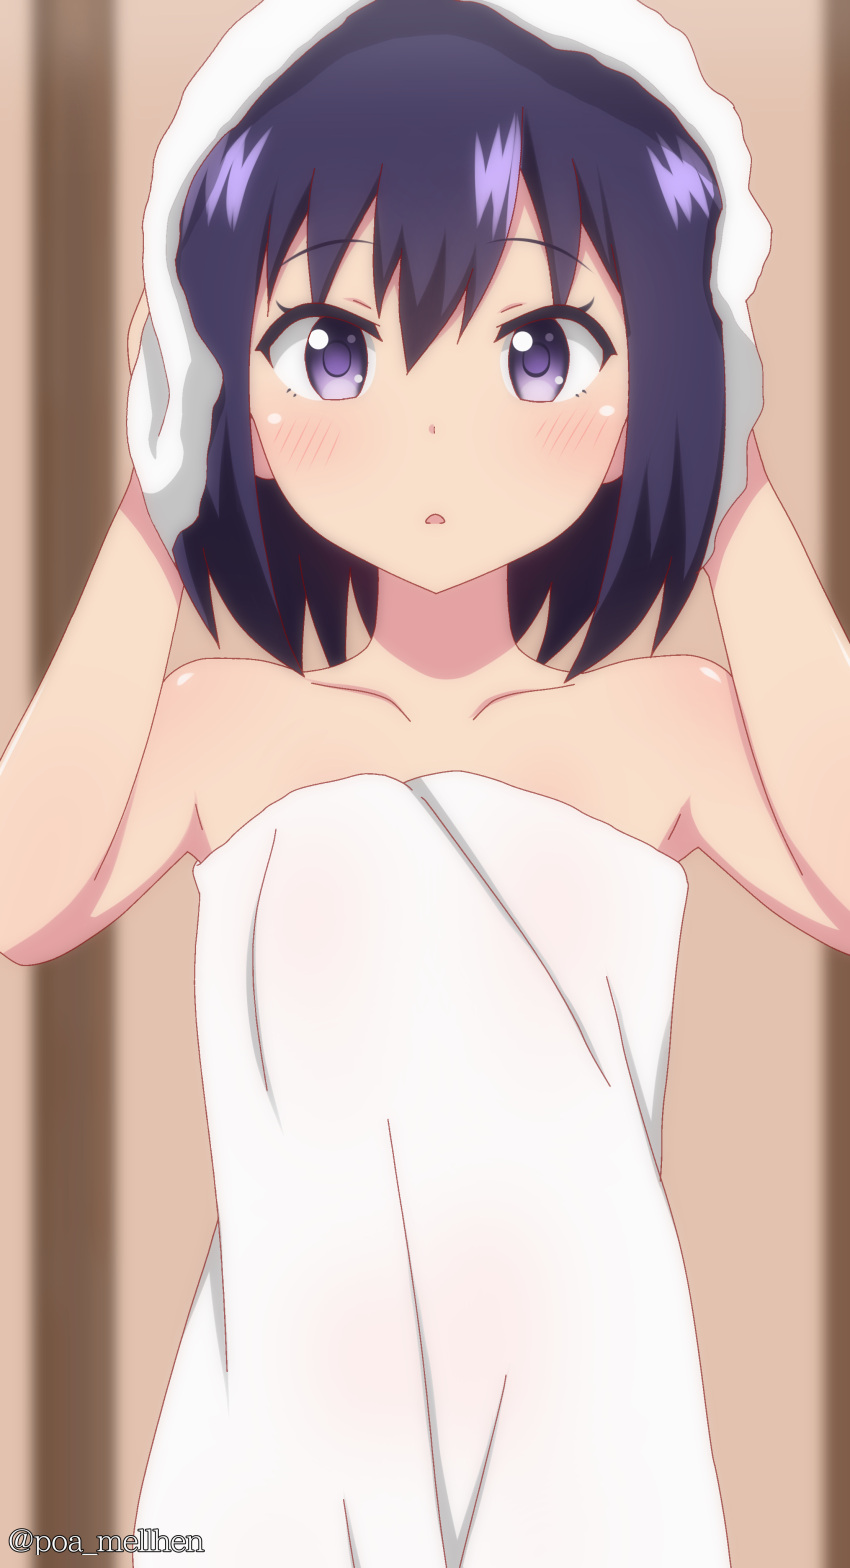 1girl absurdres bare_shoulders blush collarbone gabriel_dropout hands_up highres looking_at_viewer naked_towel open_mouth poa_mellhen purple_hair short_hair solo towel towel_on_head tsukinose_vignette_april twitter_username upper_body violet_eyes